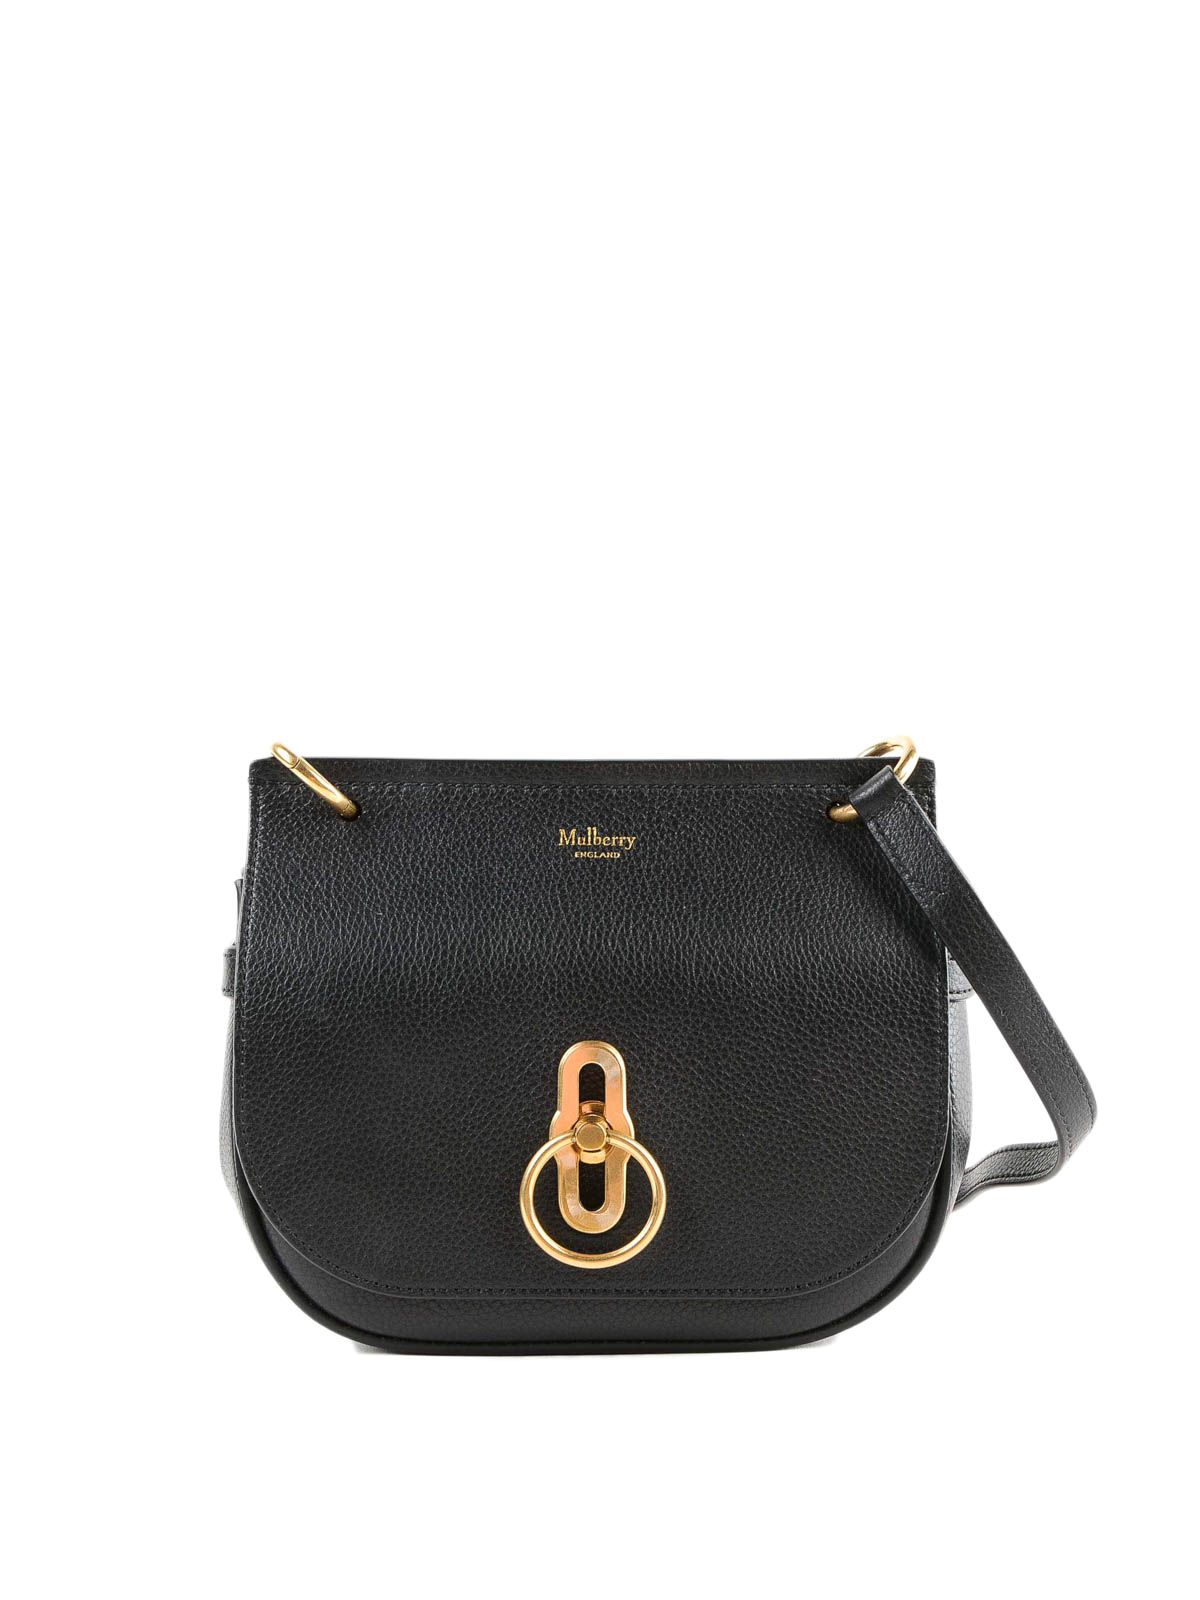 Mulberry - Black and gold grainy leather crossbody bag - cross body bags - HH4966205A100